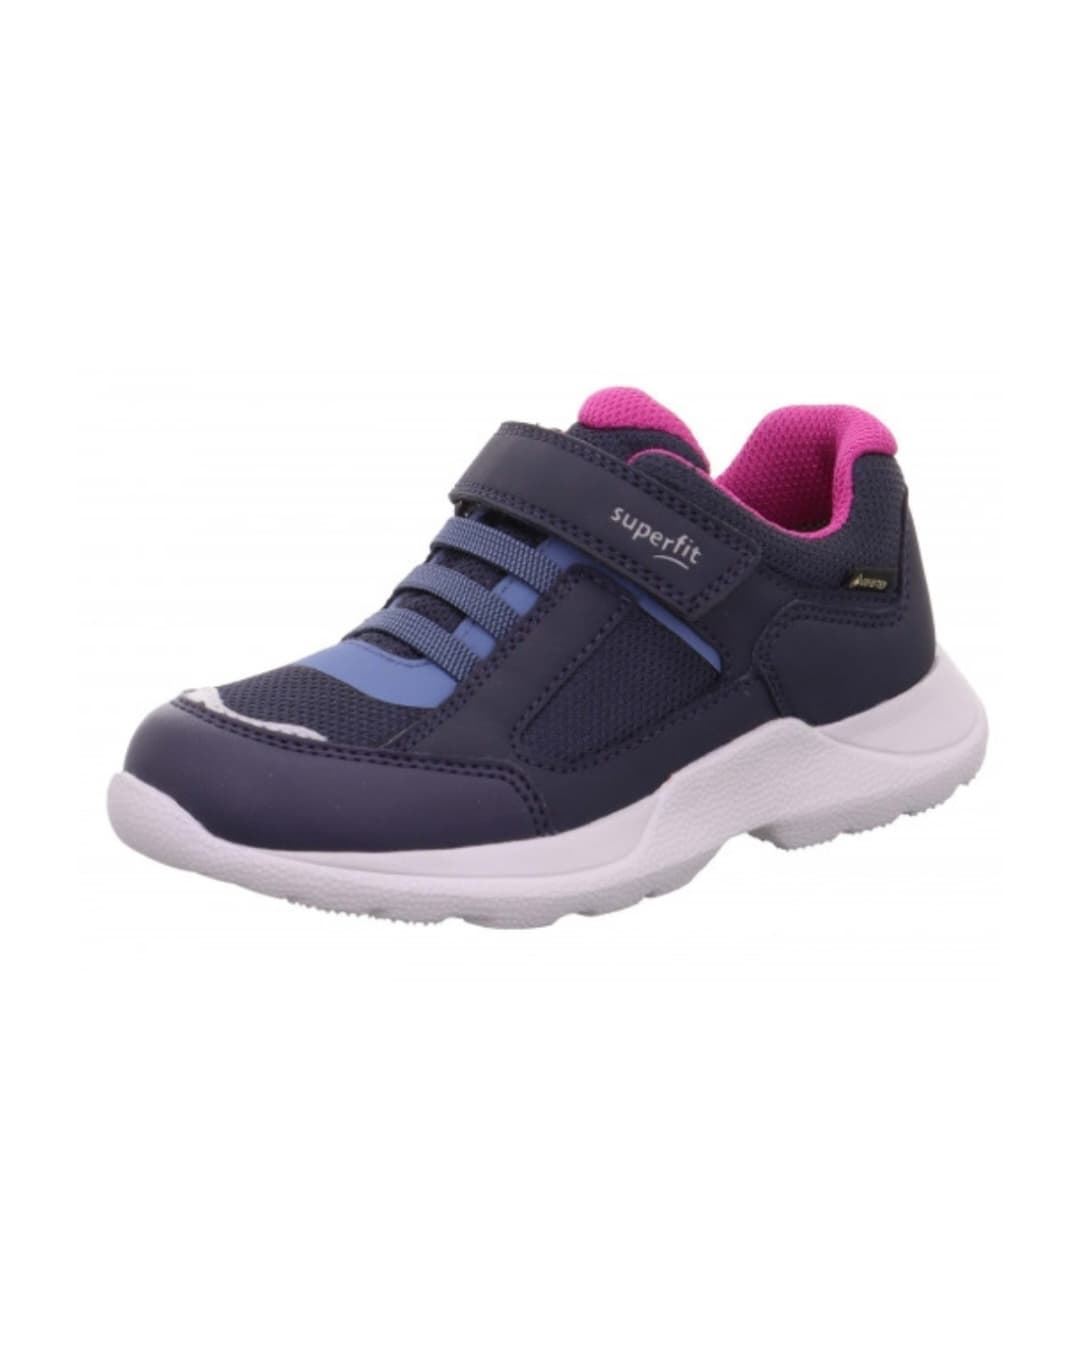 Superfit sneakers for girls Gore-tex Navy Blue - Image 1